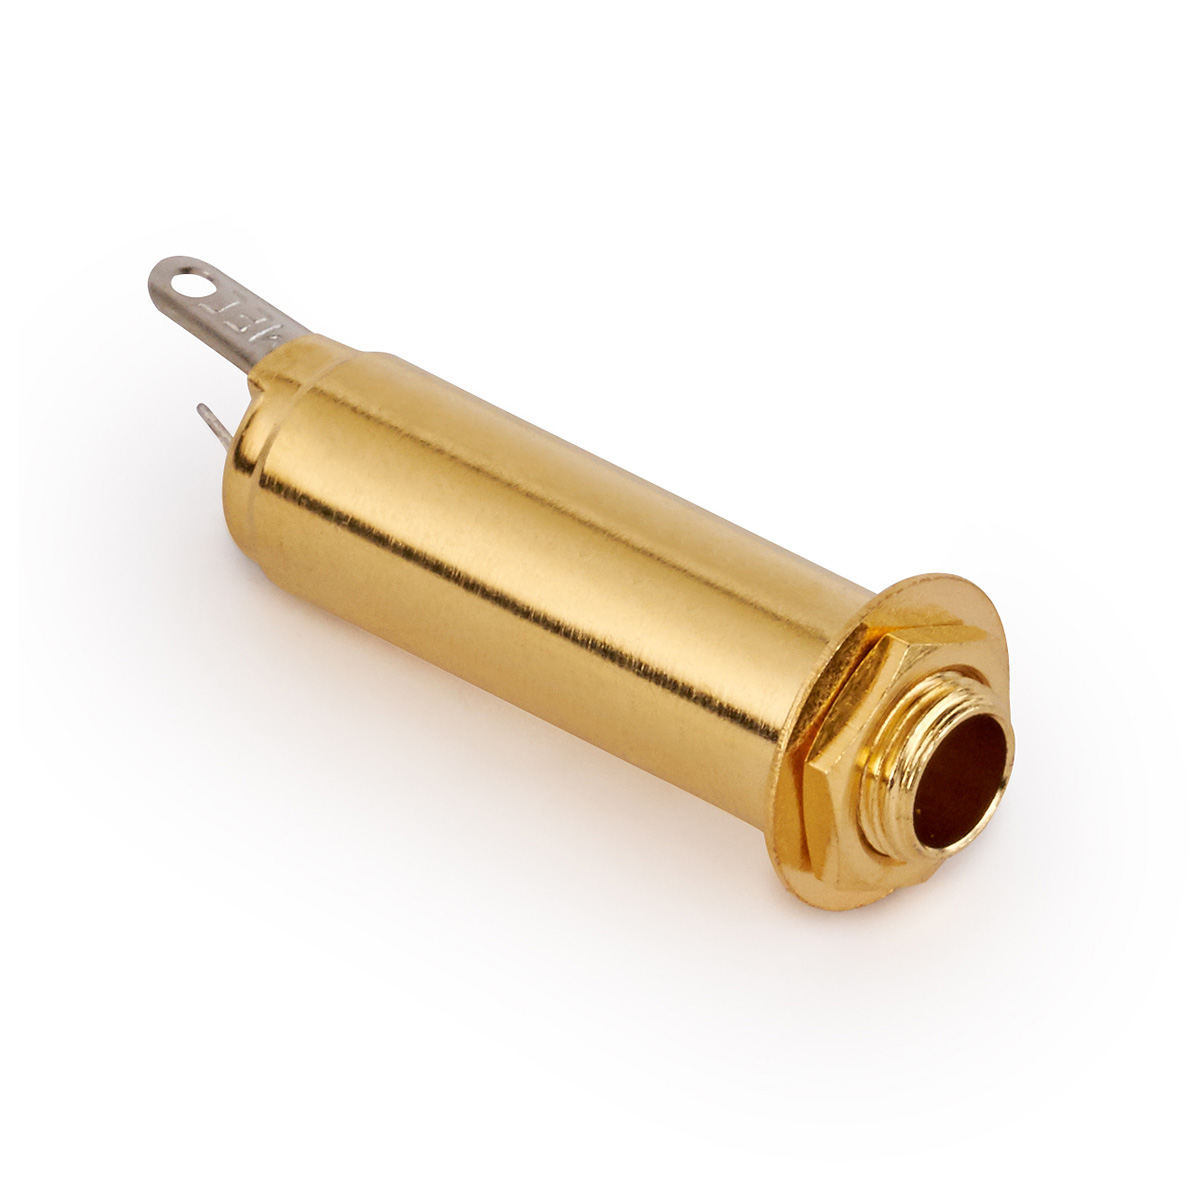 MEC Closed Stereo Jack Socket, for Mouning with Jackplates - Gold